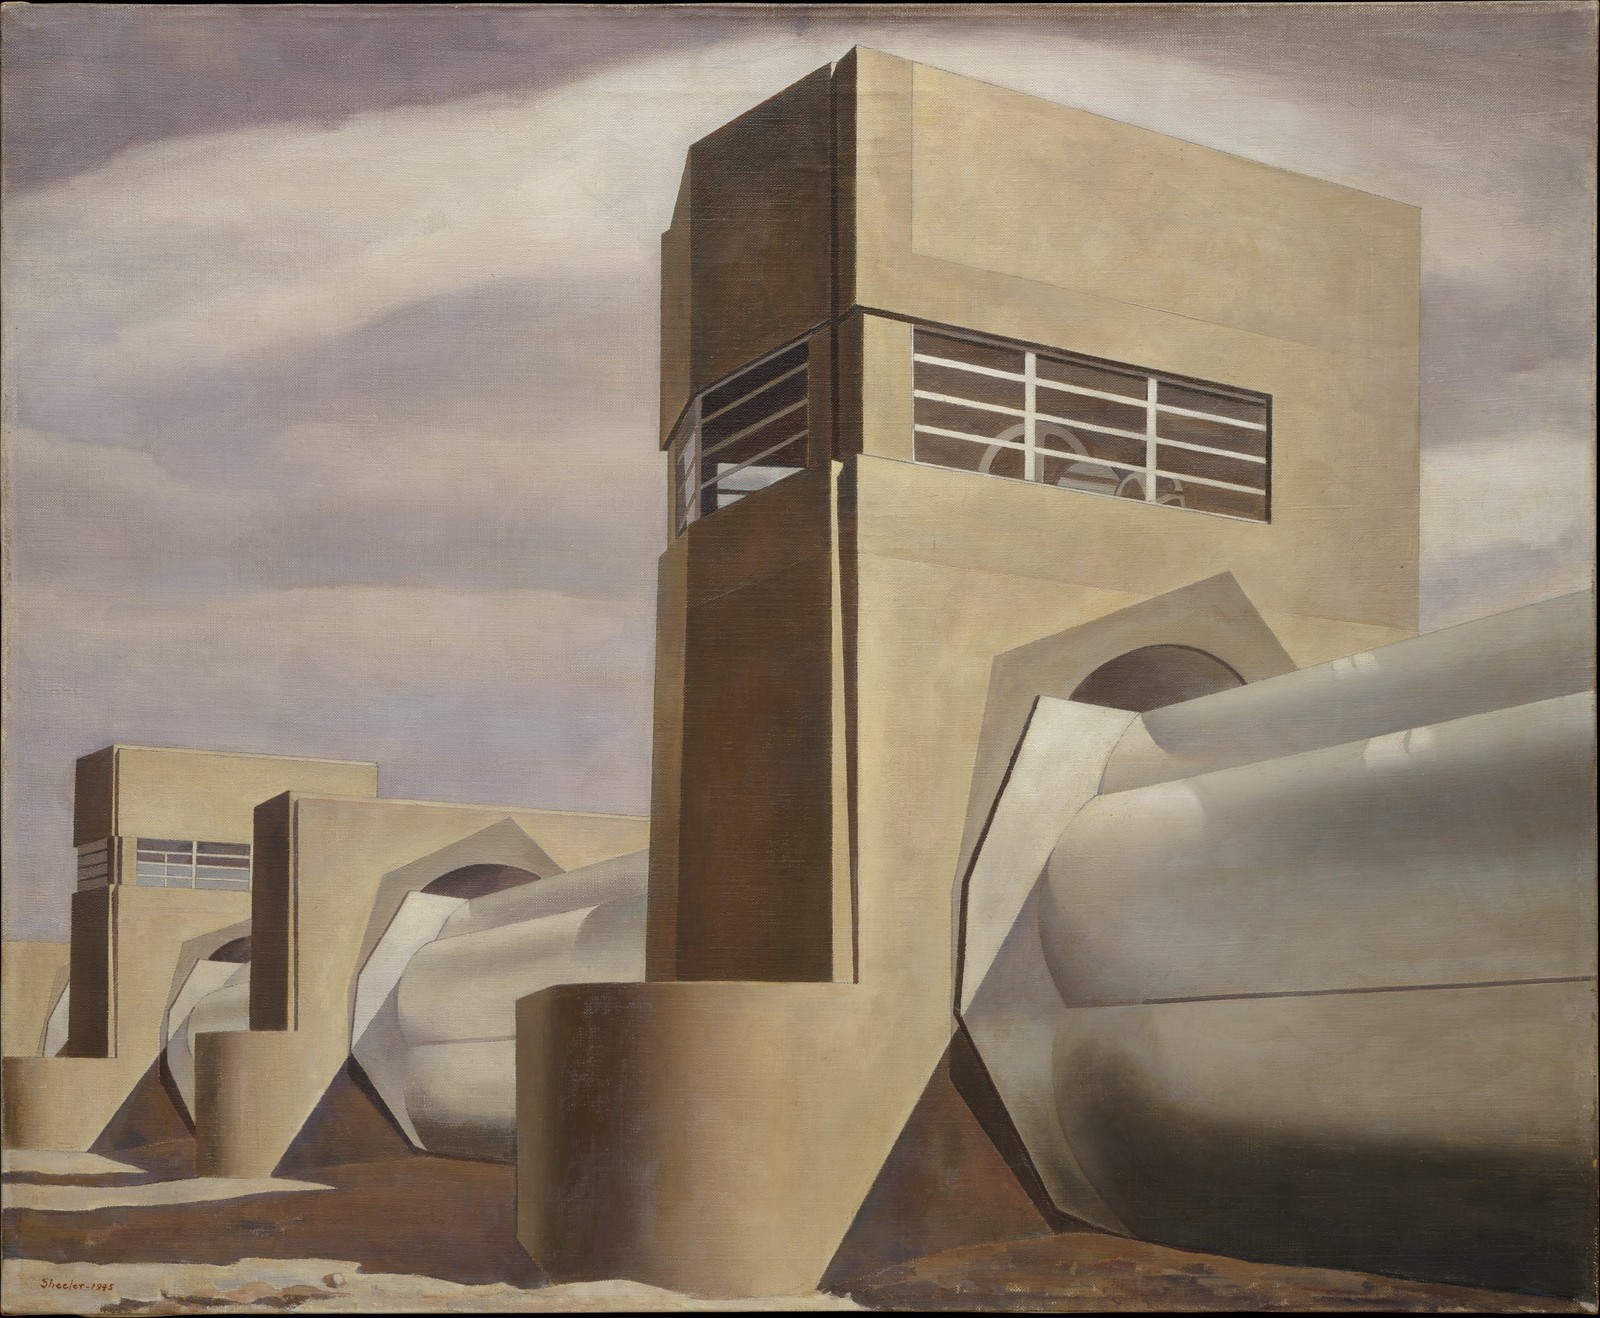 Charles Sheeler. Water. 1945. Oil on canvas. 61 x 74 cm. The Metropolitan Museum of Art (New York City, United States).